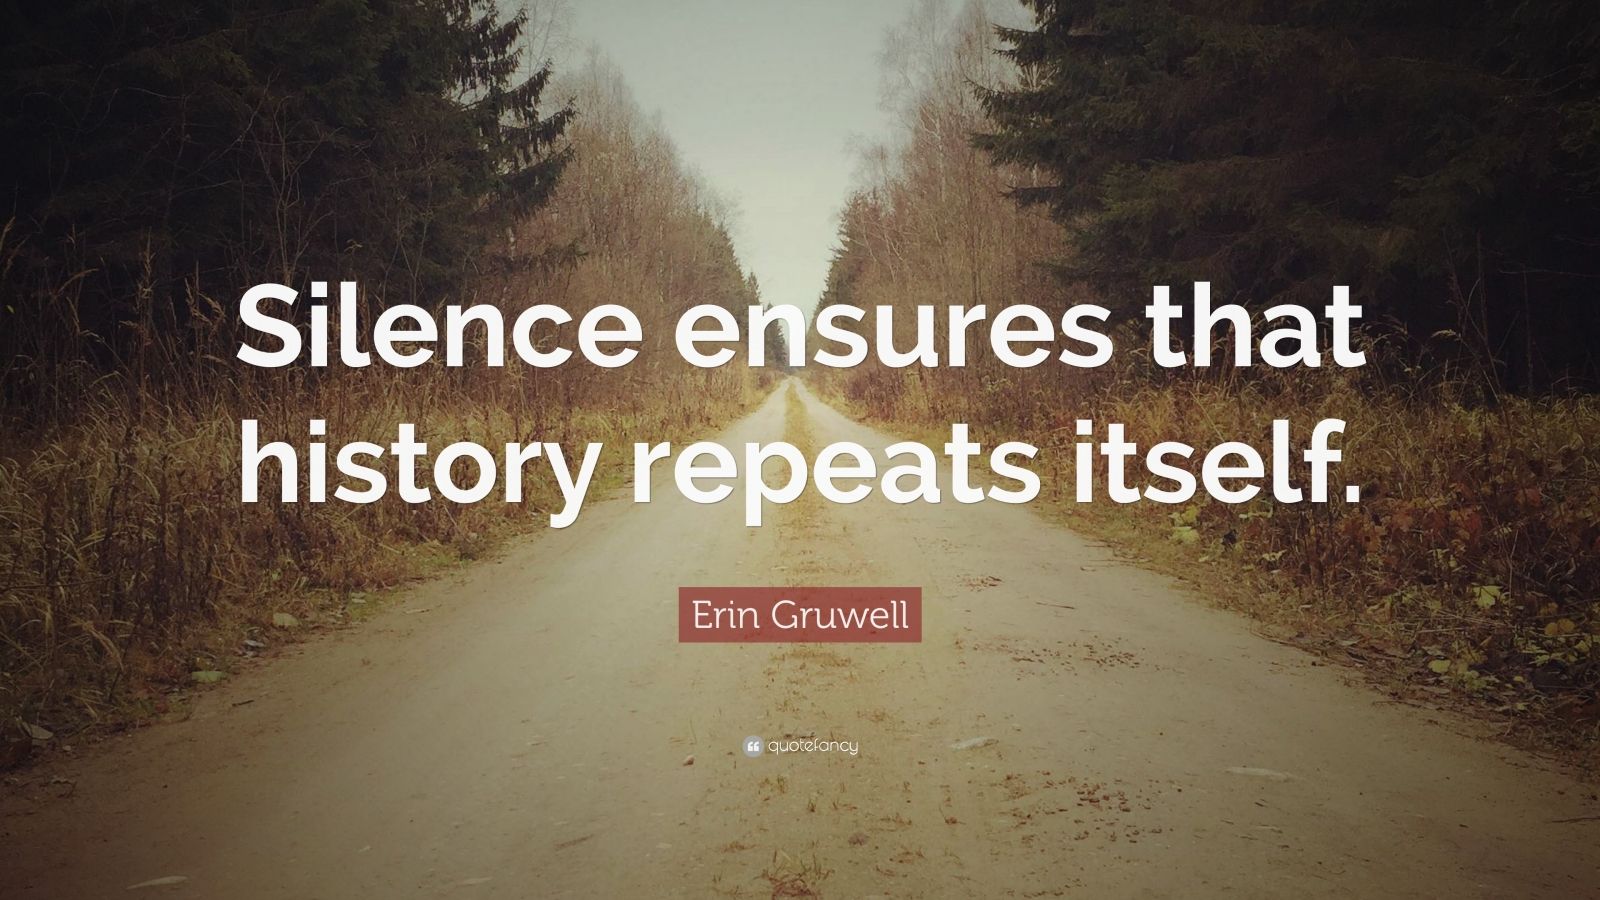 Famous Quote History Repeats Itself Quotes about history repeats itself (51 quotes)